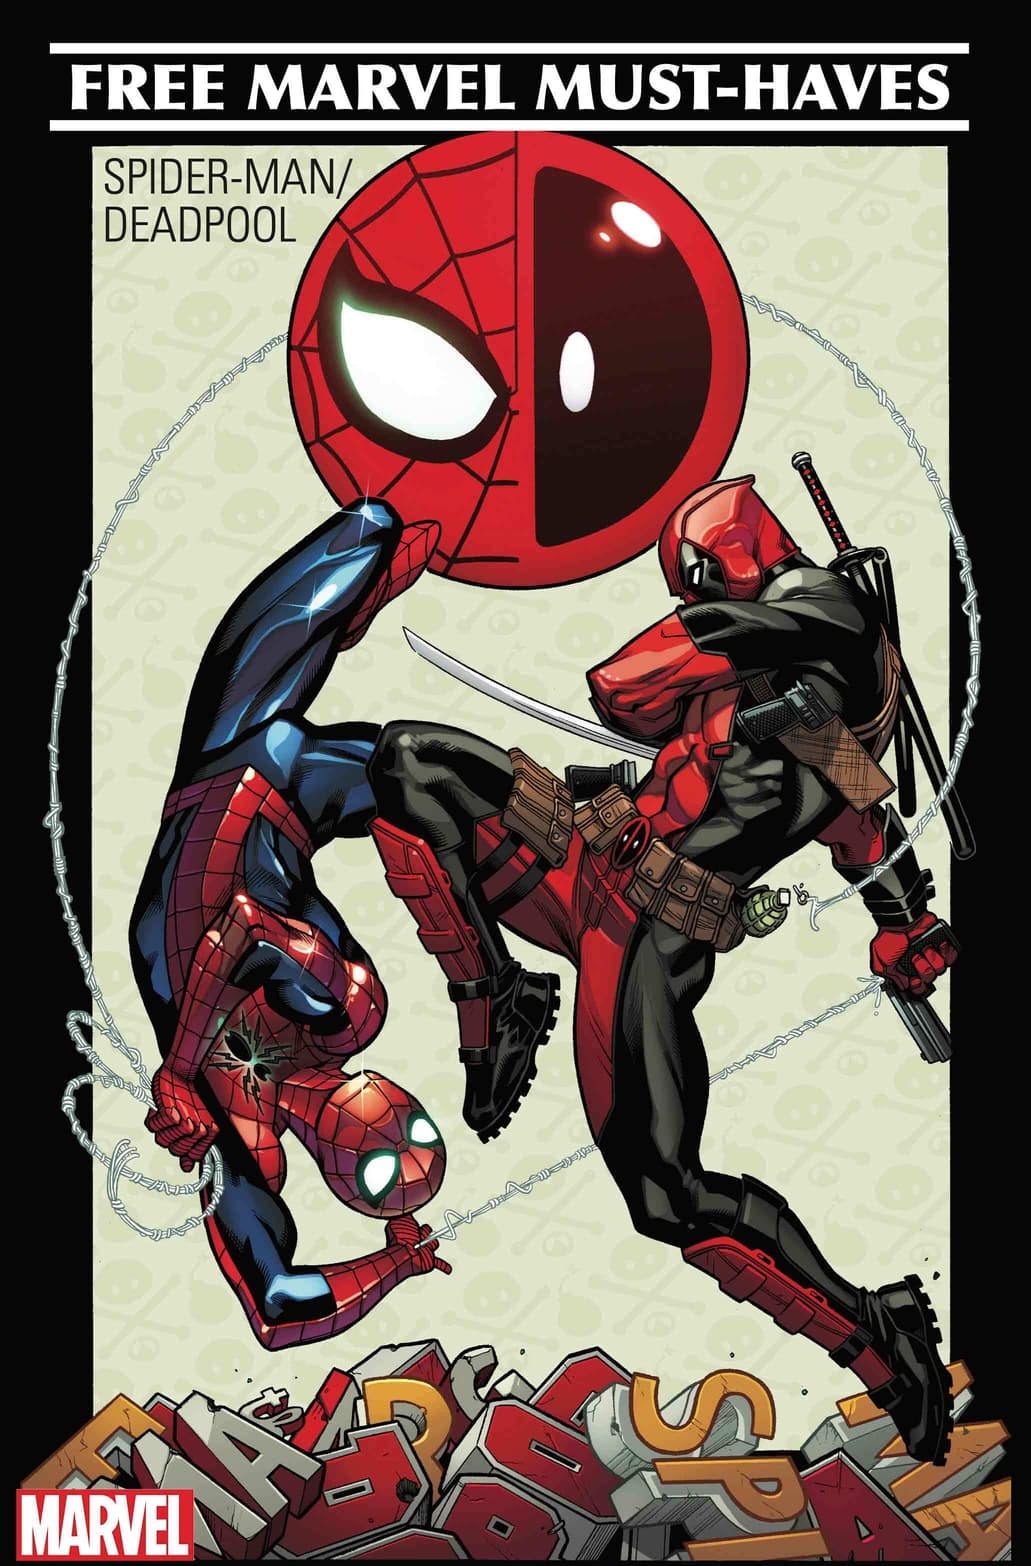 SPIDER-MAN/DEADPOOL (2016) #1 cover by Ed McGuinness